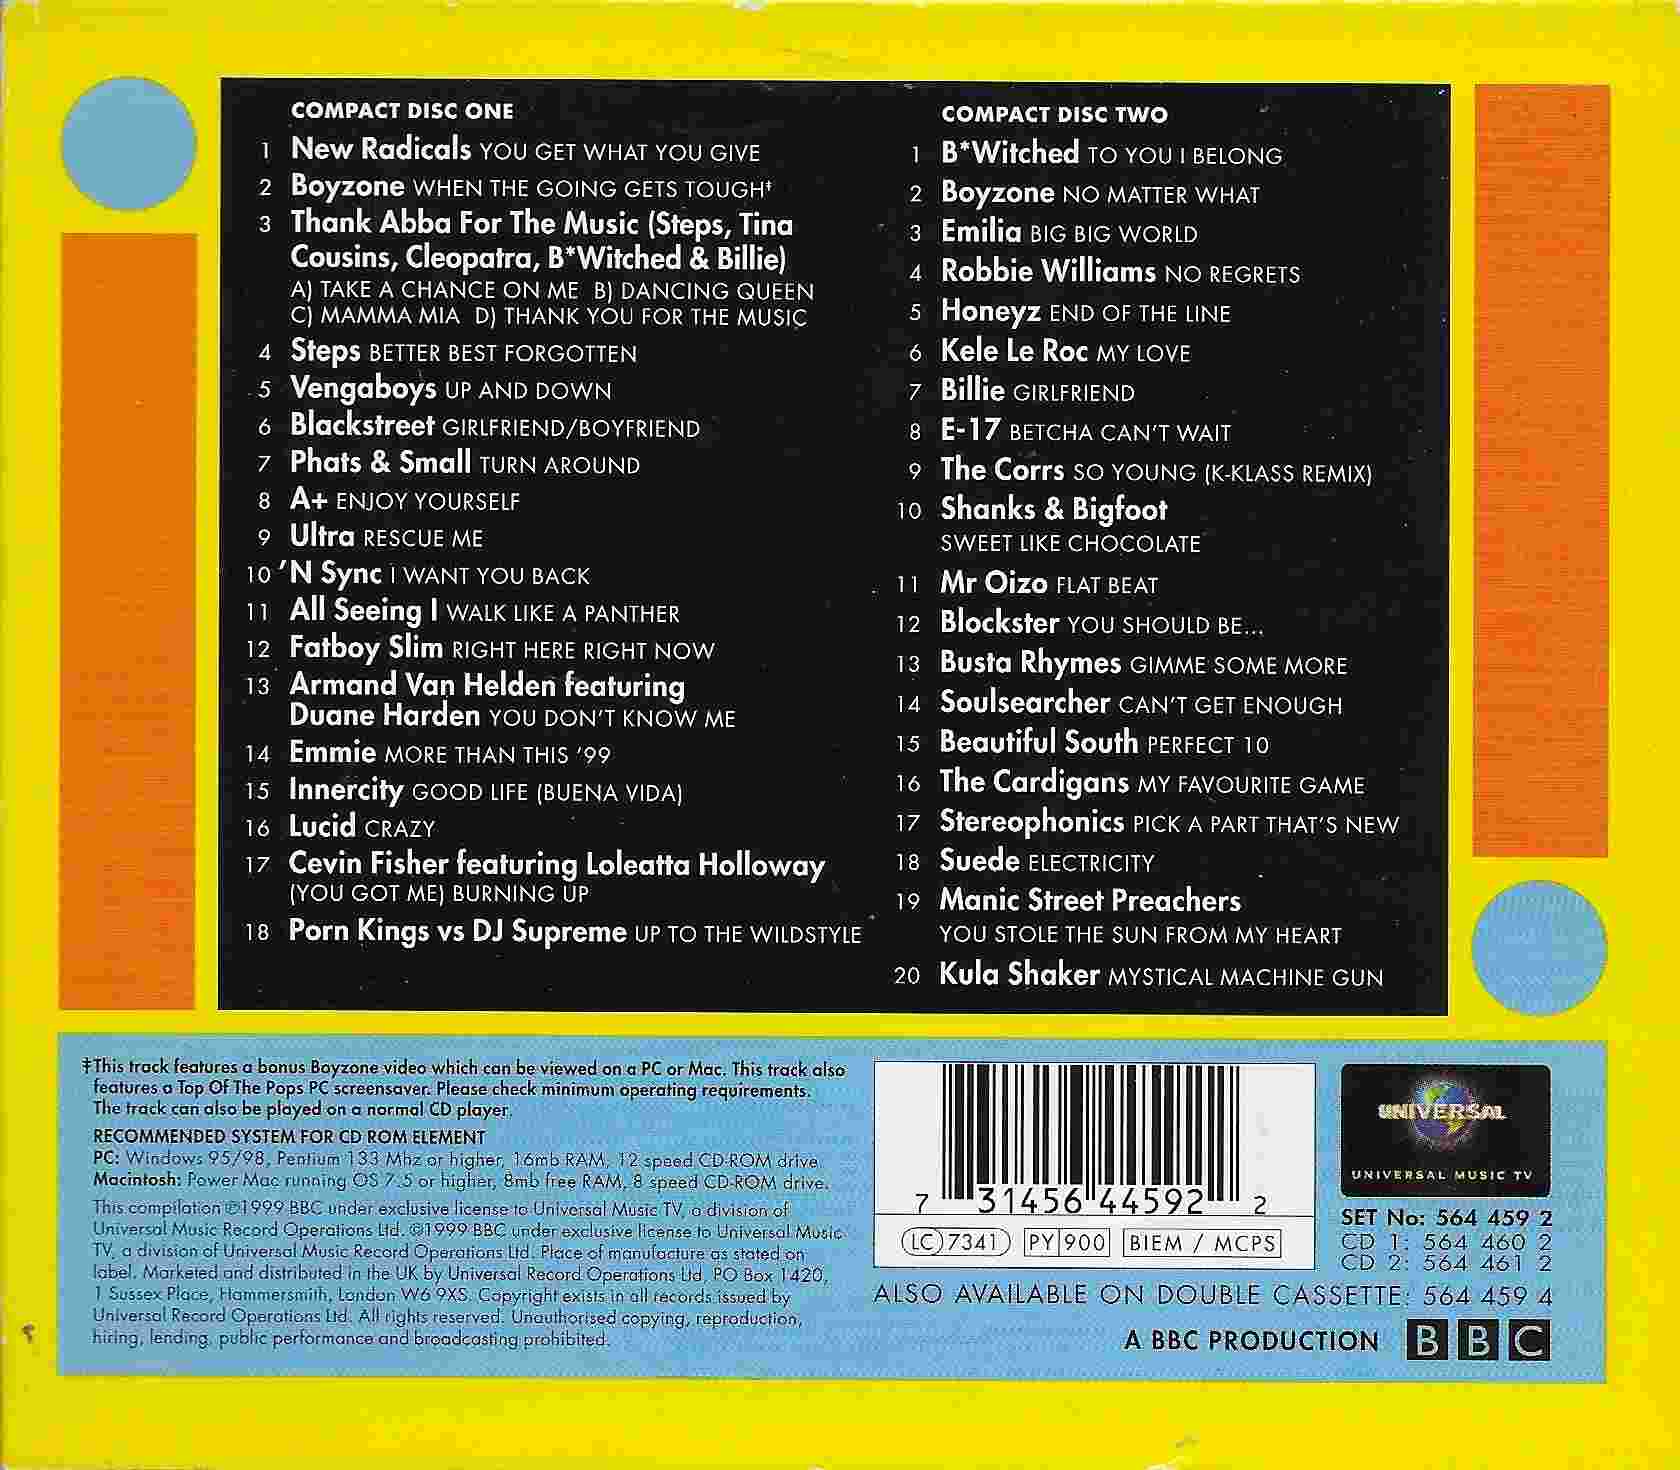 Back cover of 564459 - 2